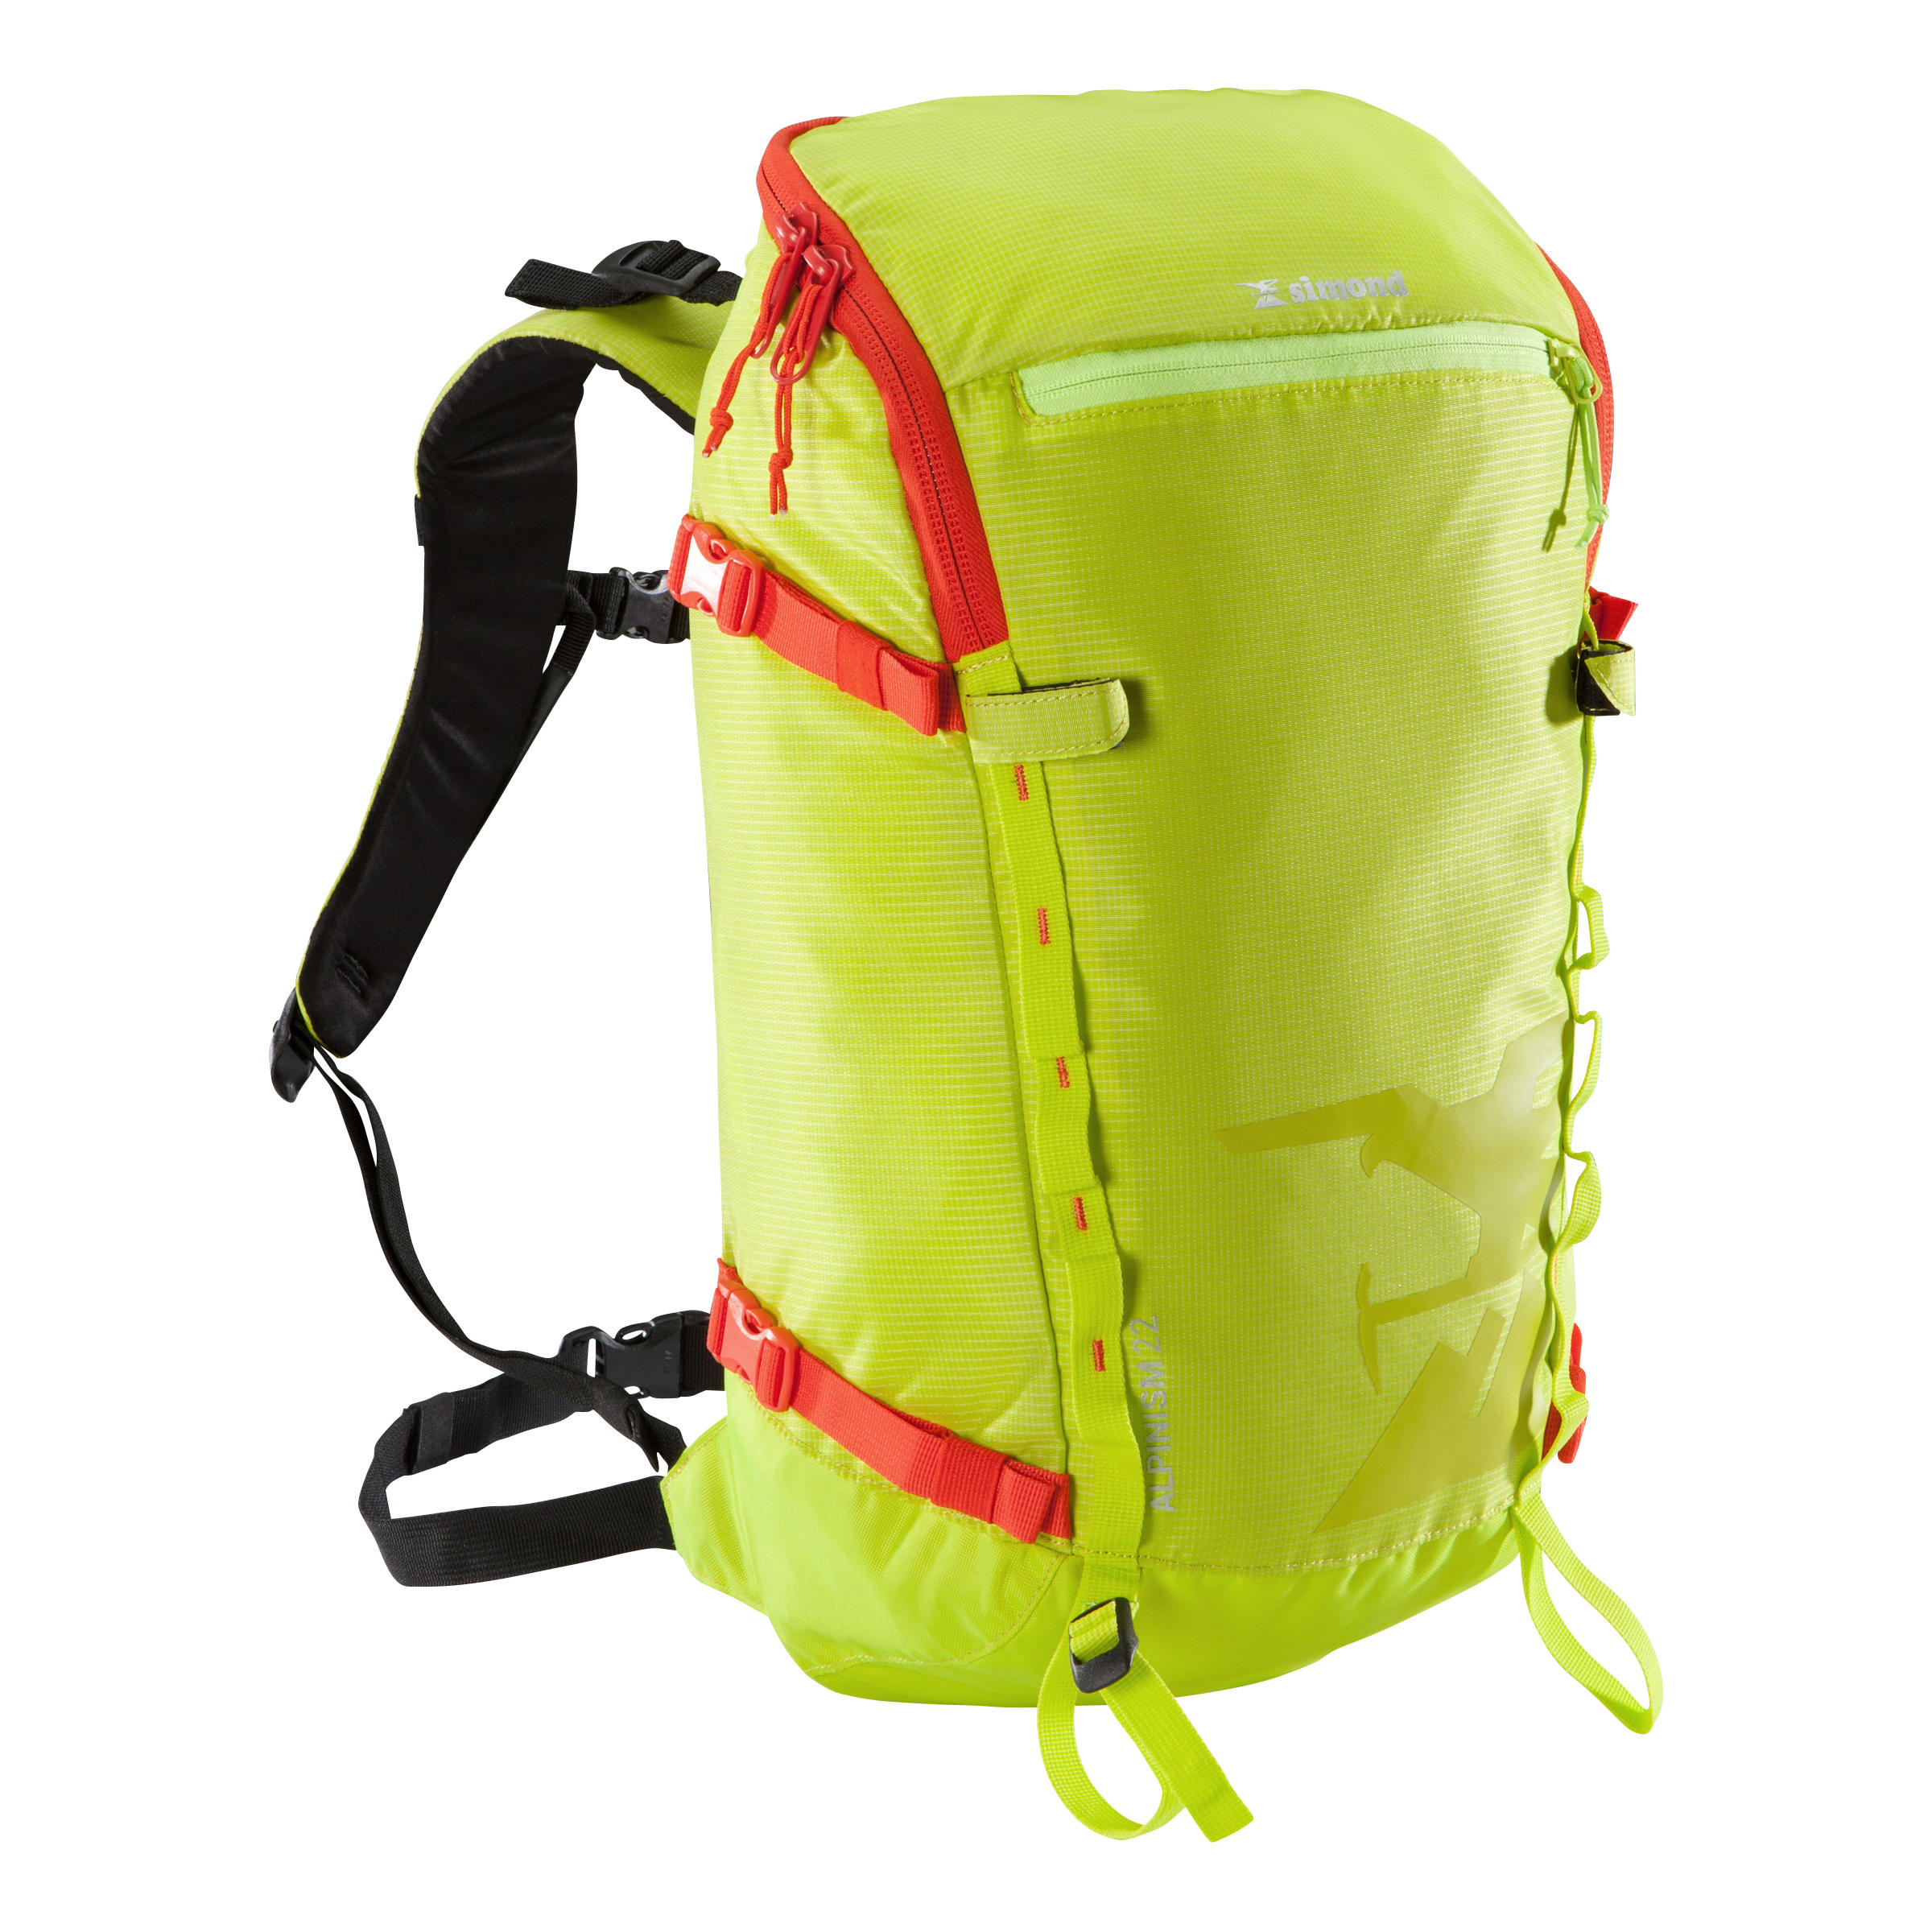 SIMOND Mountaineering Backpack 22 Litres - Alpinism 22 Yellow